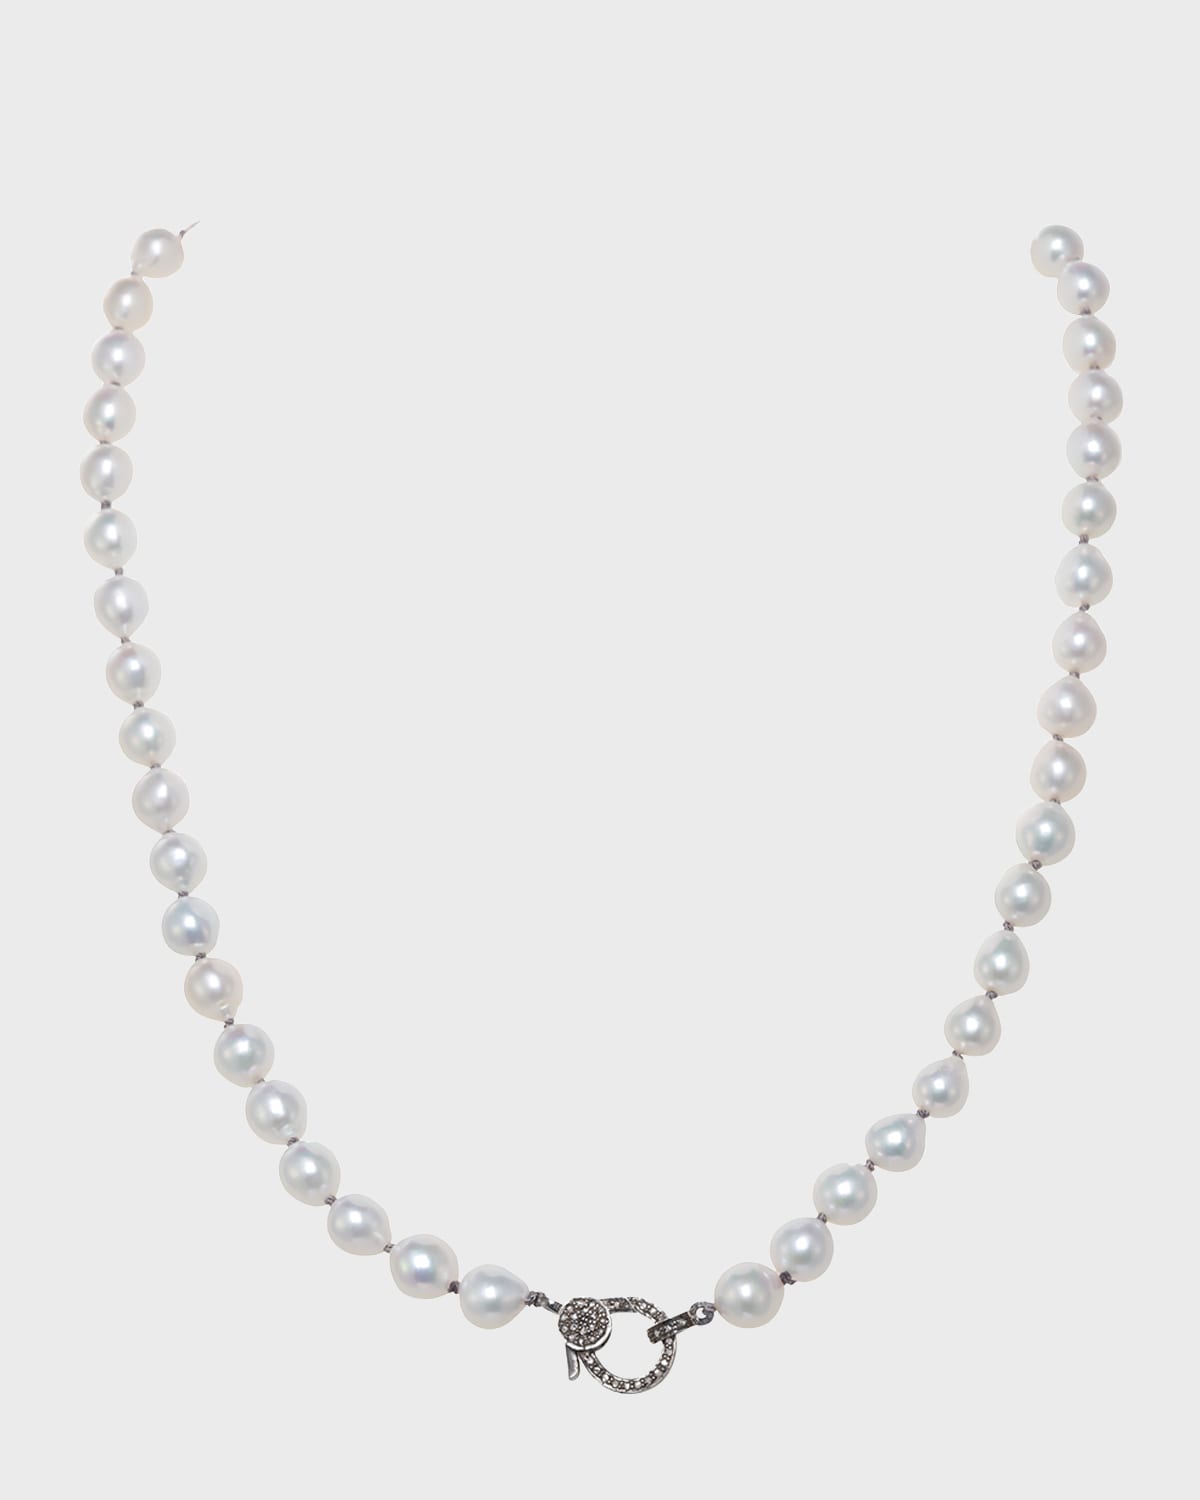 Petite Baroque Pearl Necklace with Diamond Clasp, 7-8mm, 16"L